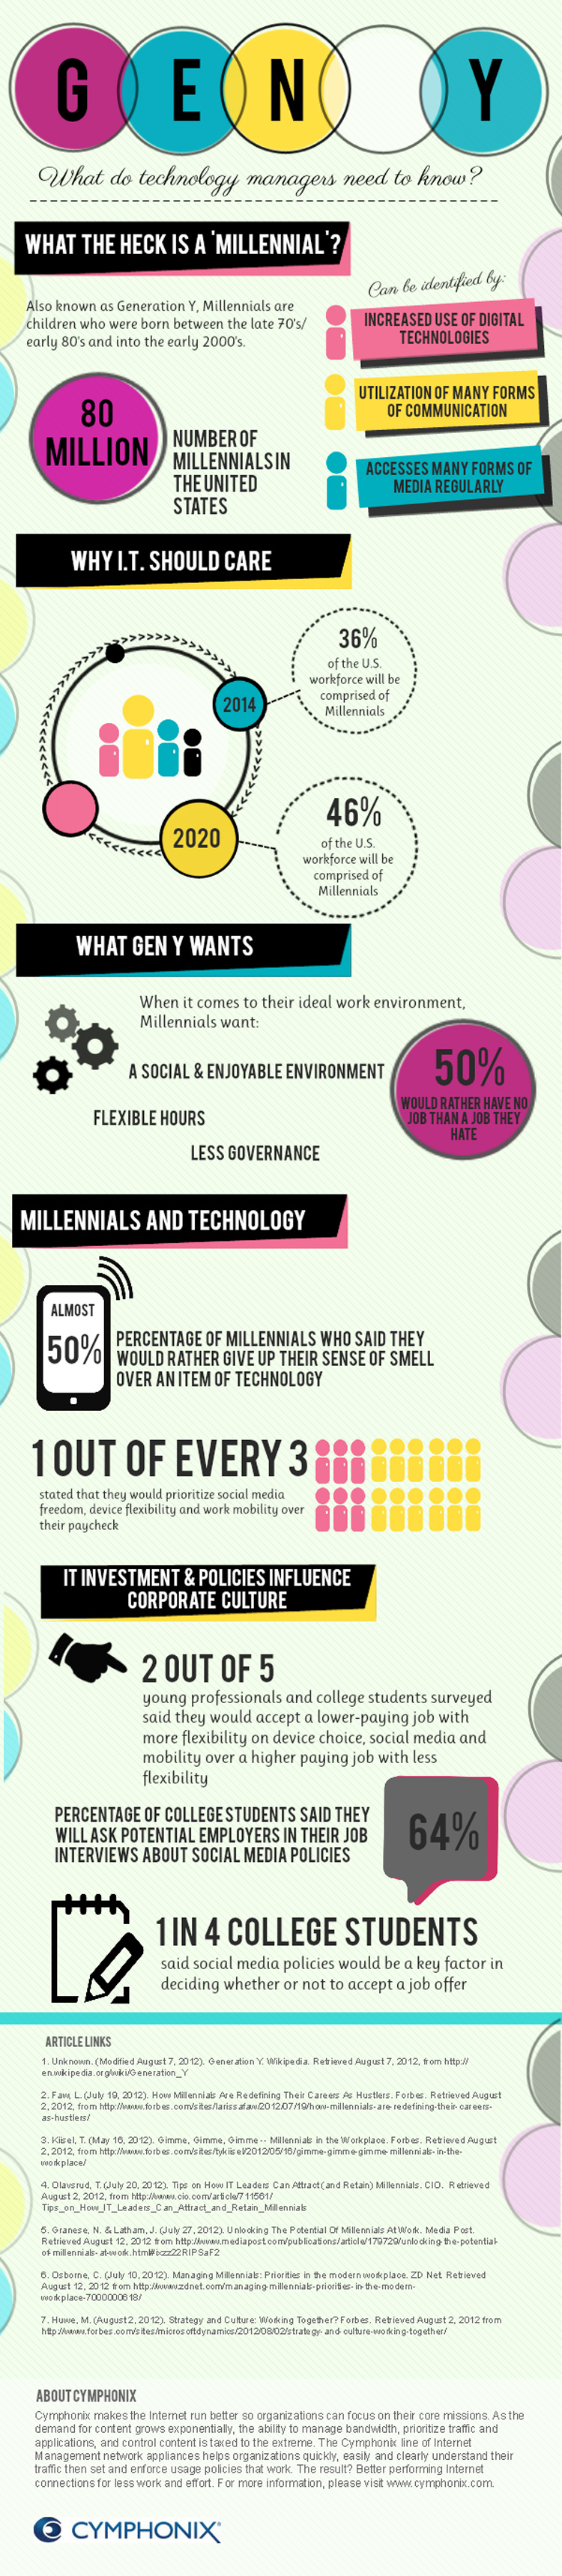 Millennials and generation y in the workplace